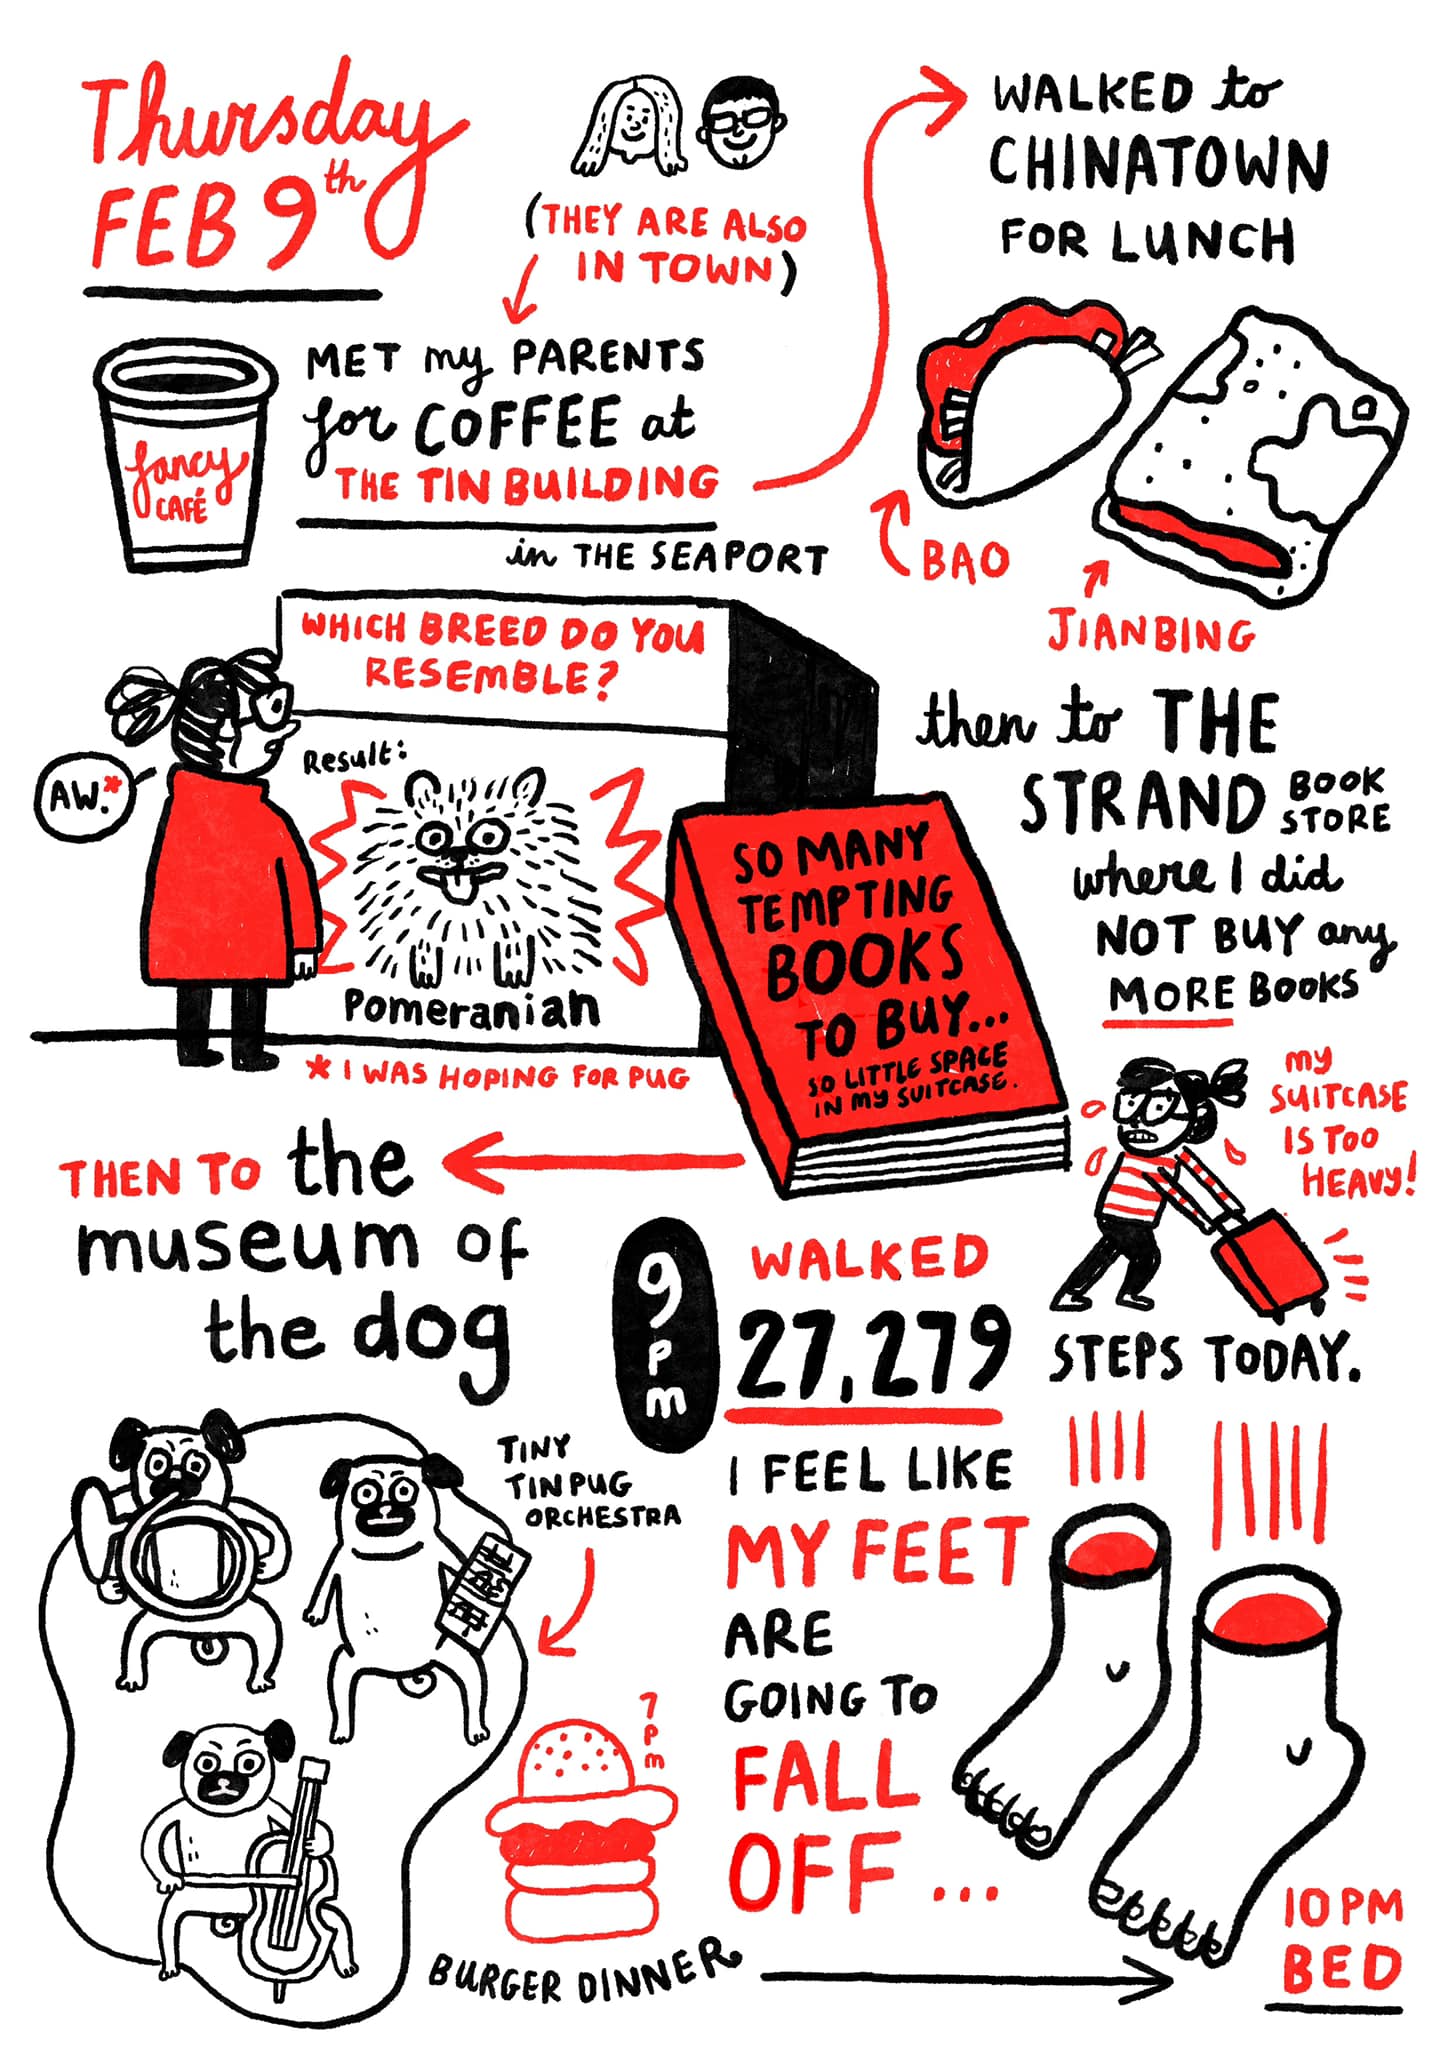 NYC daily diary by Gemma Correll featuring the Museum of the Dog and walking 27279 steps